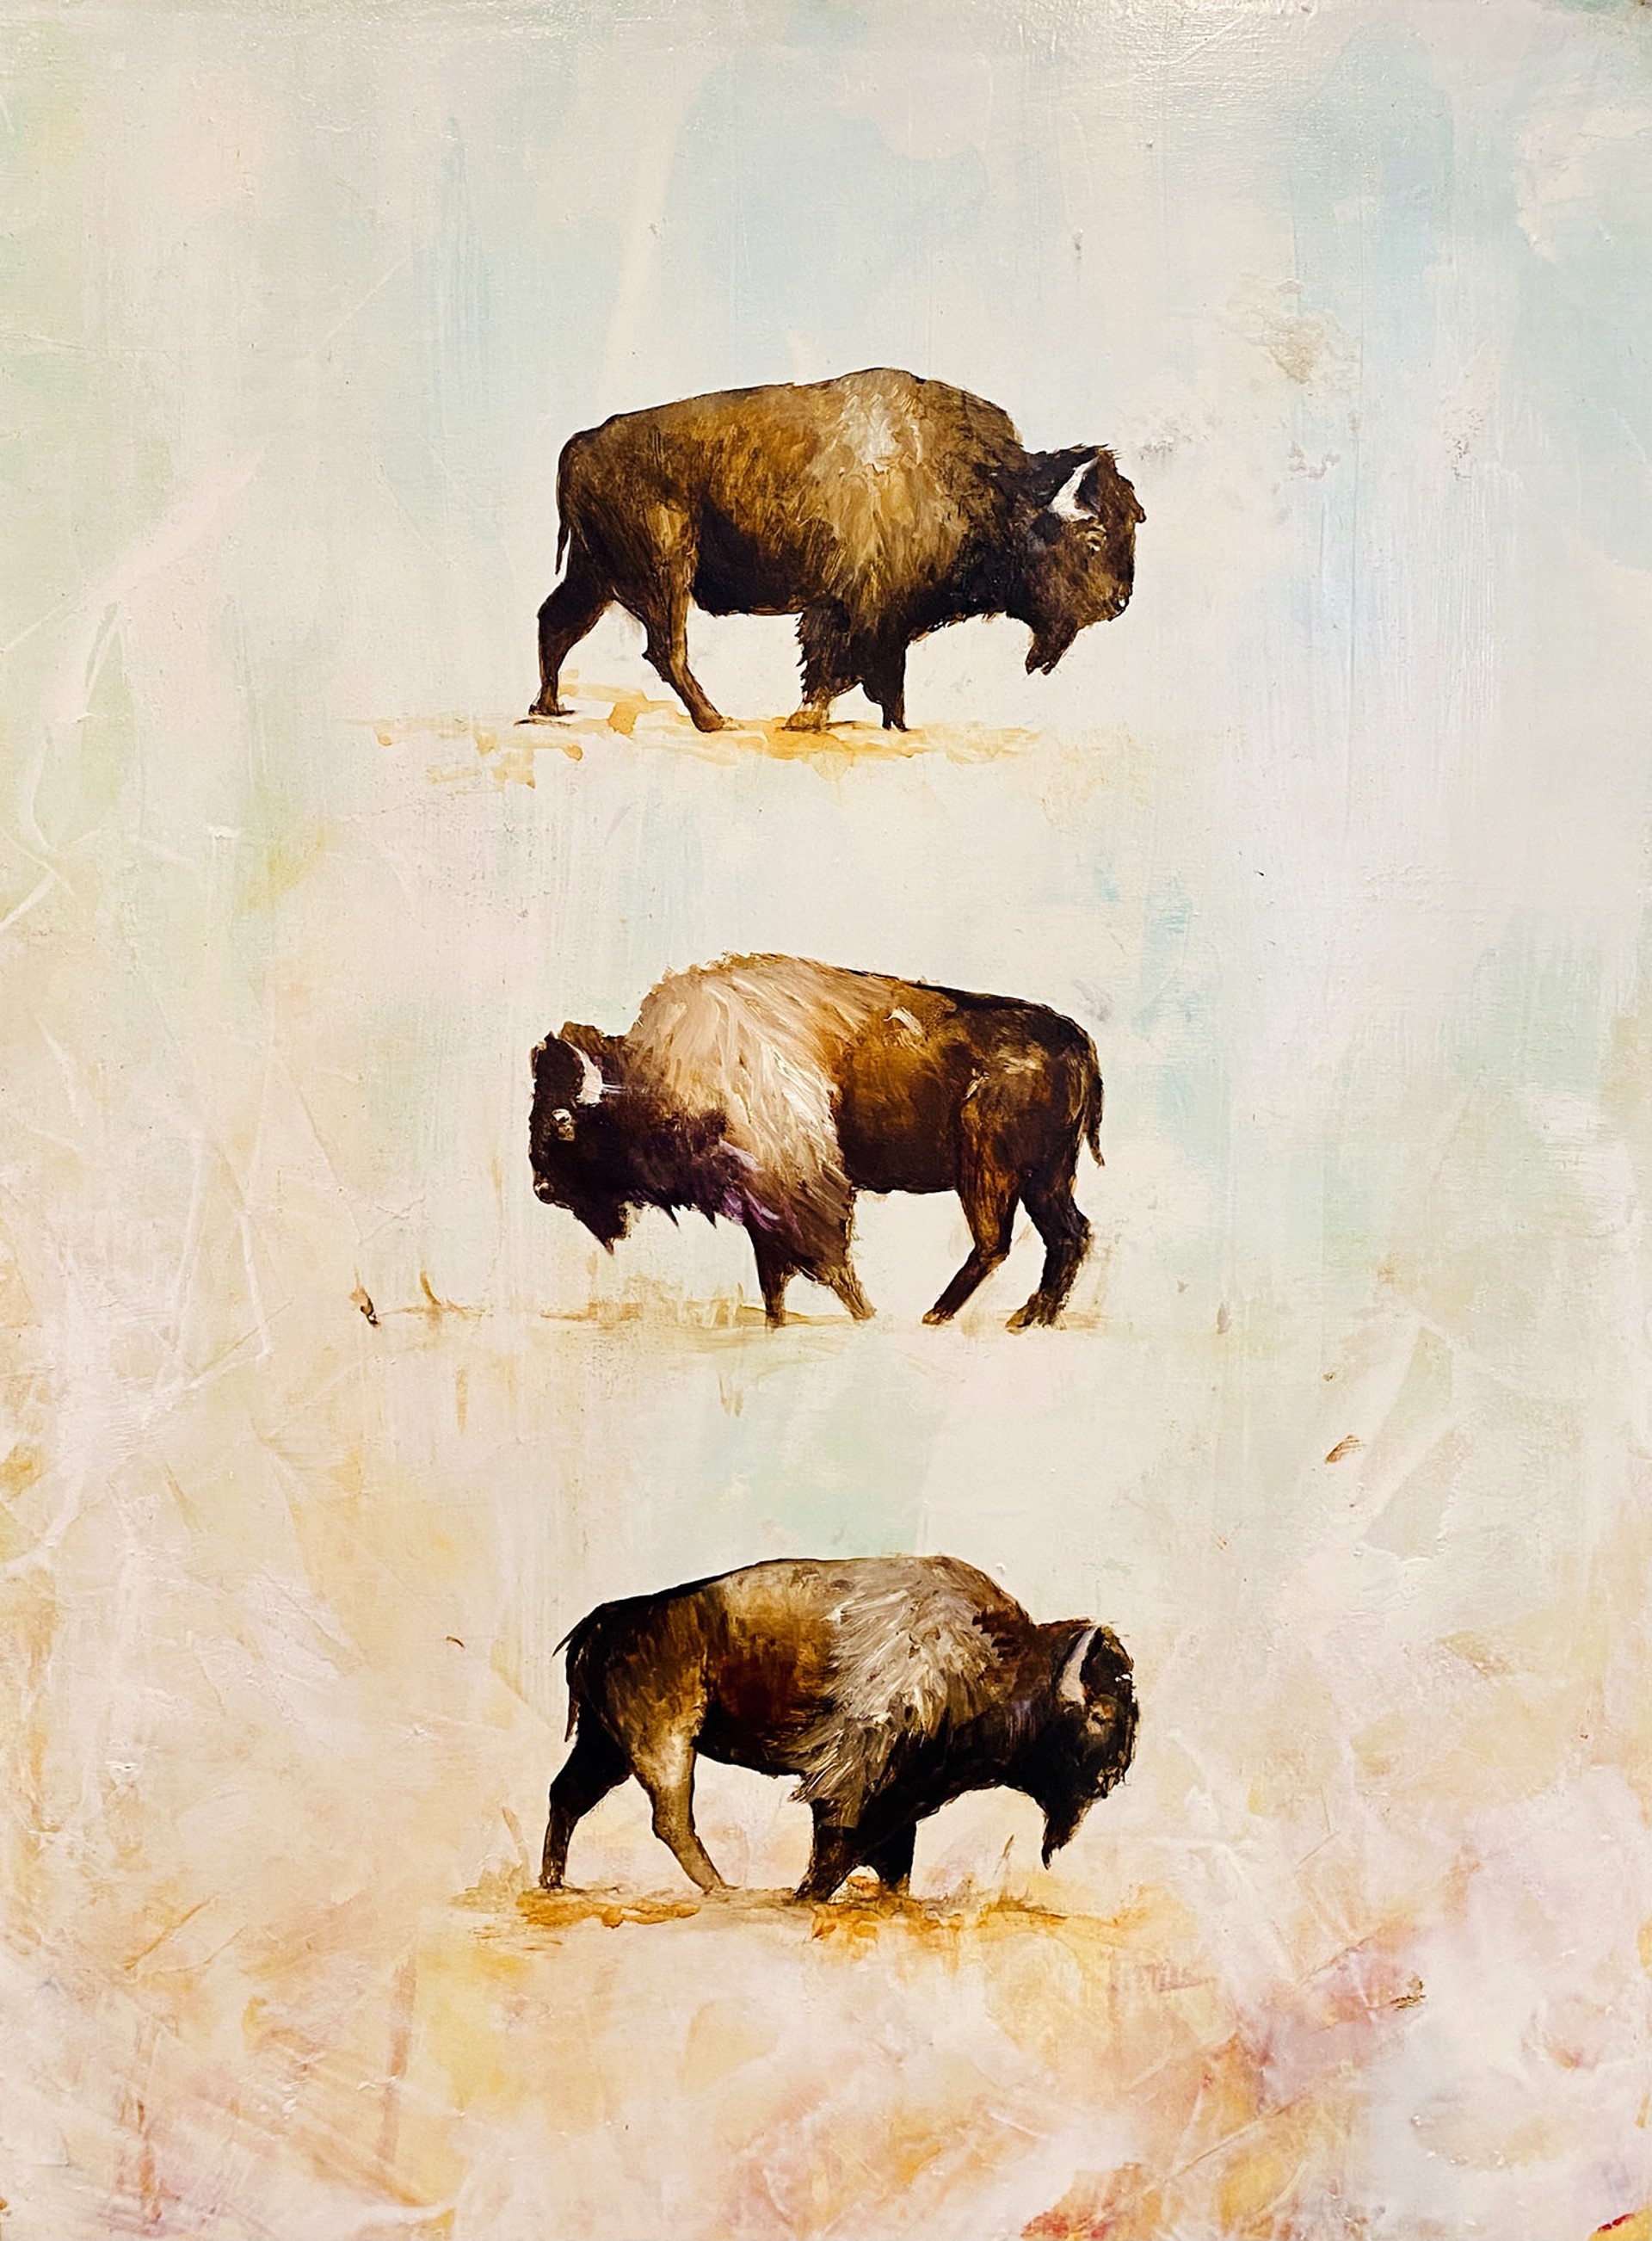 Original Oil Painting Featuring Three Bison On An Abstract Neutral Background